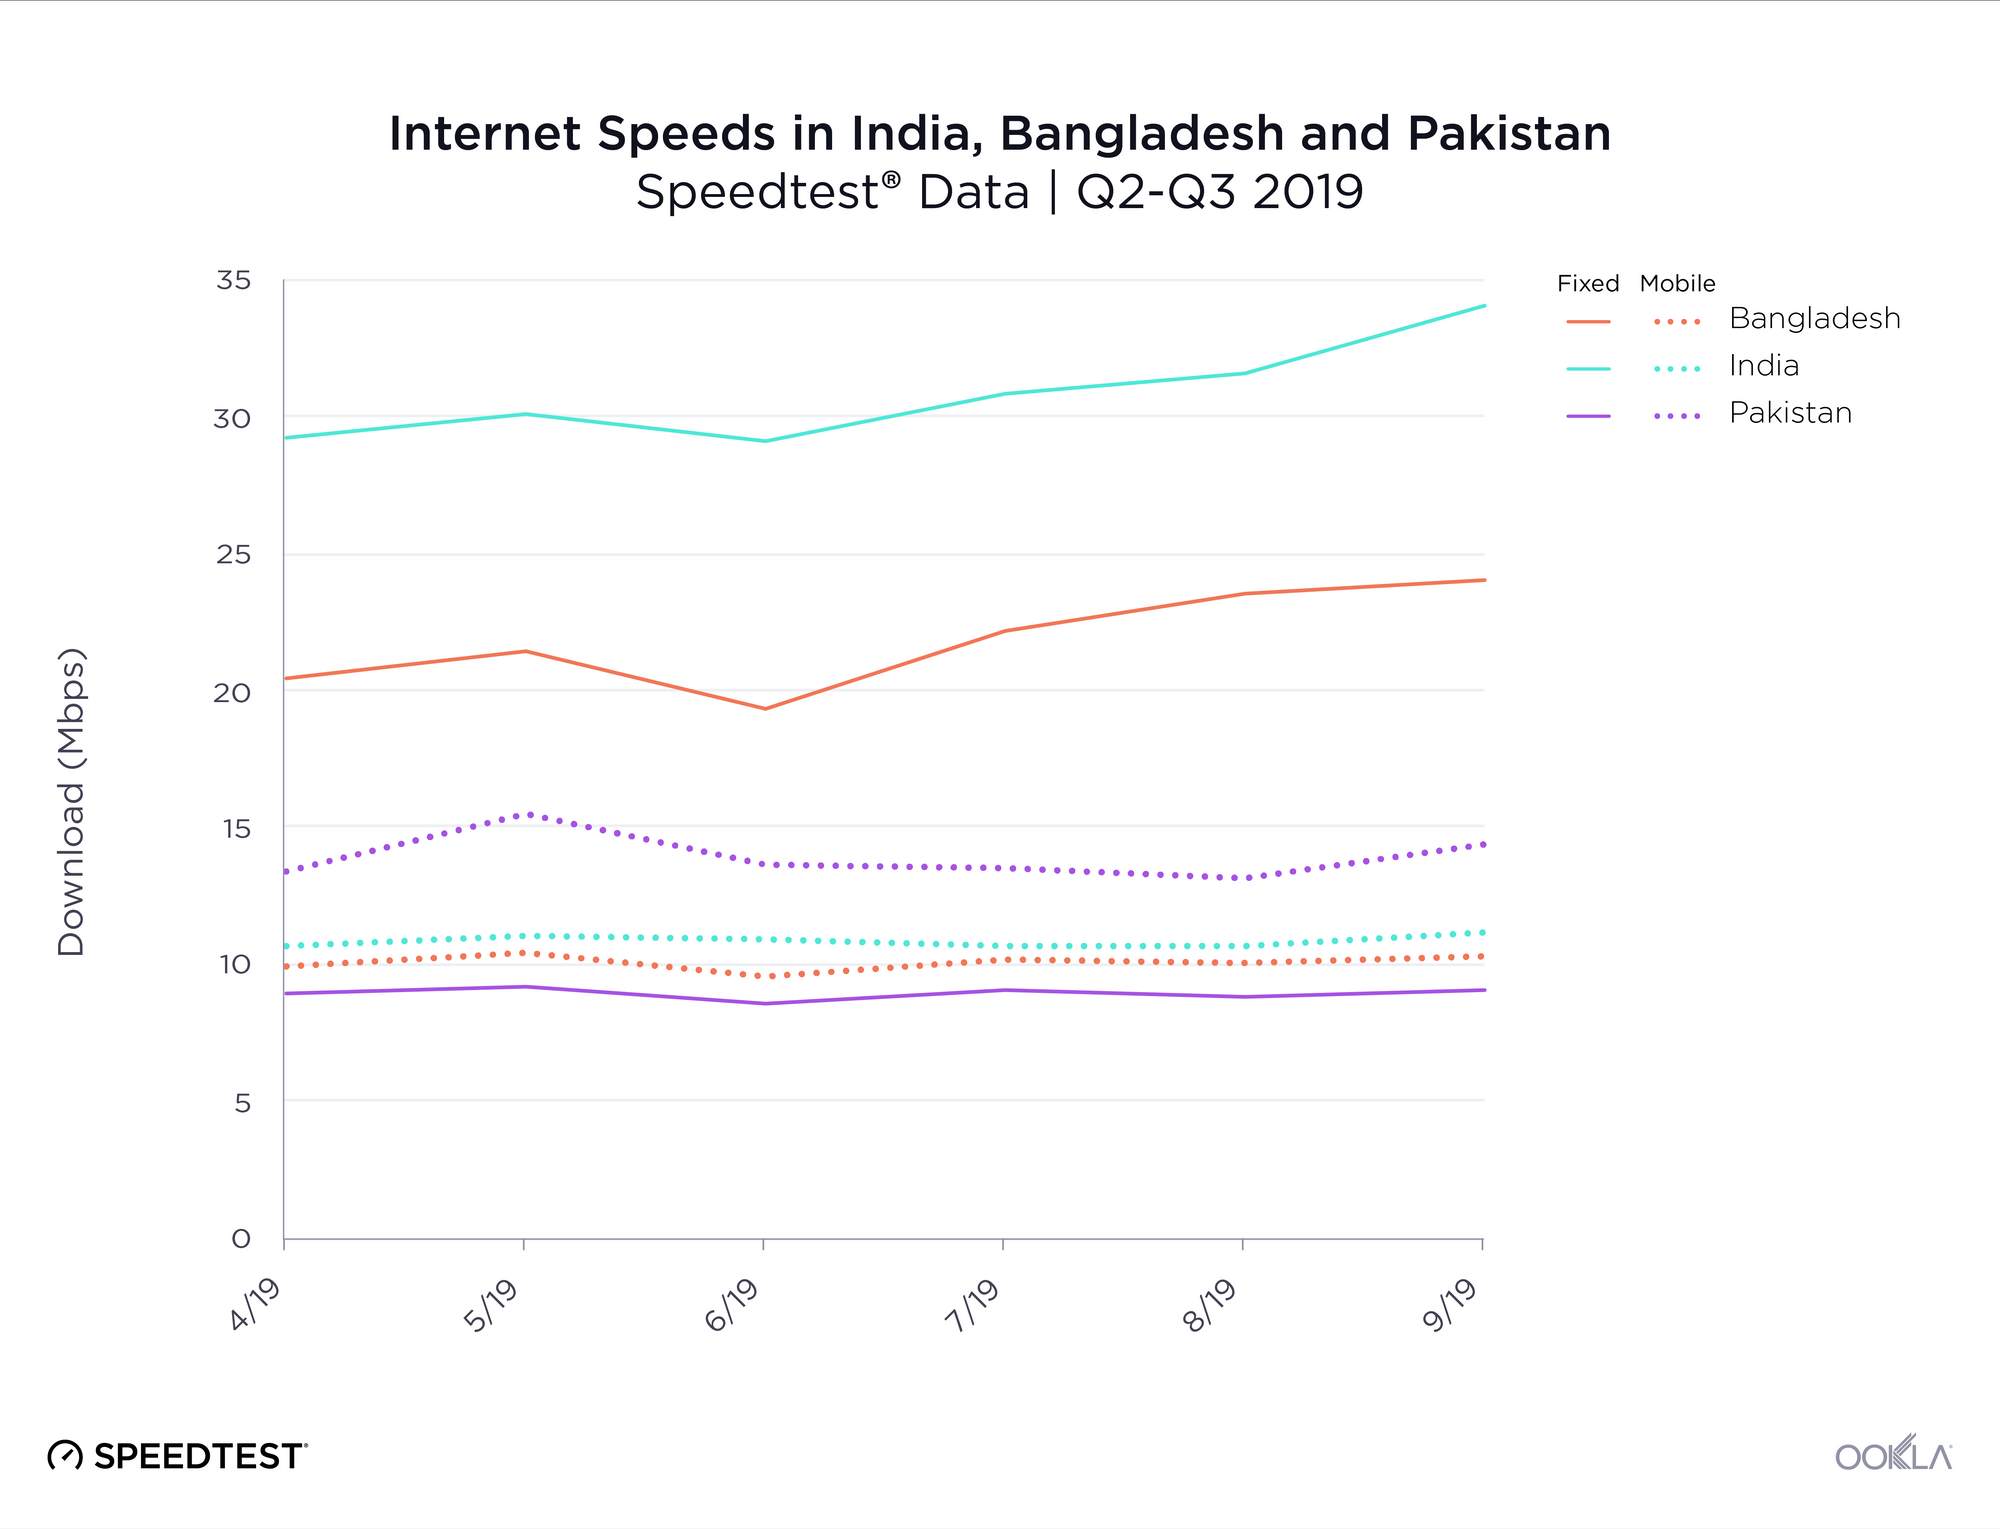 Fixed broadband and mobile download speeds analysis in India, Bangladesh, and Pakistan. Image: Ookla.